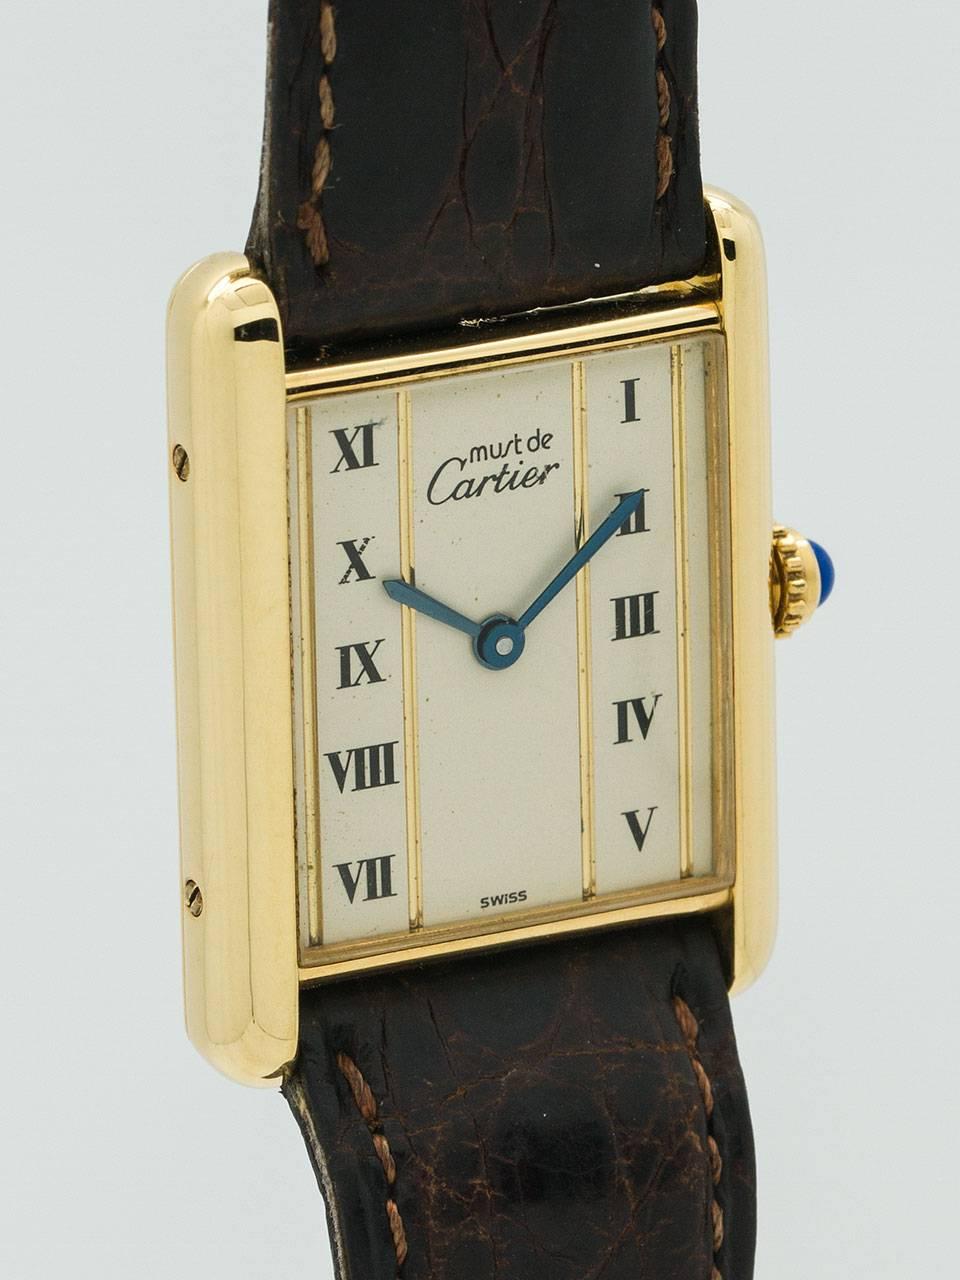 Cartier Man's Vermeil Tank Louis Must de Cartier, circa 1990s. Vermeil, 20 microns gold over silver, 23.5 X 31mm case secured by 4 case back and 4 side screws. Unusual dial configuration with 2 columns of Roman figures bordered by gold stripes with